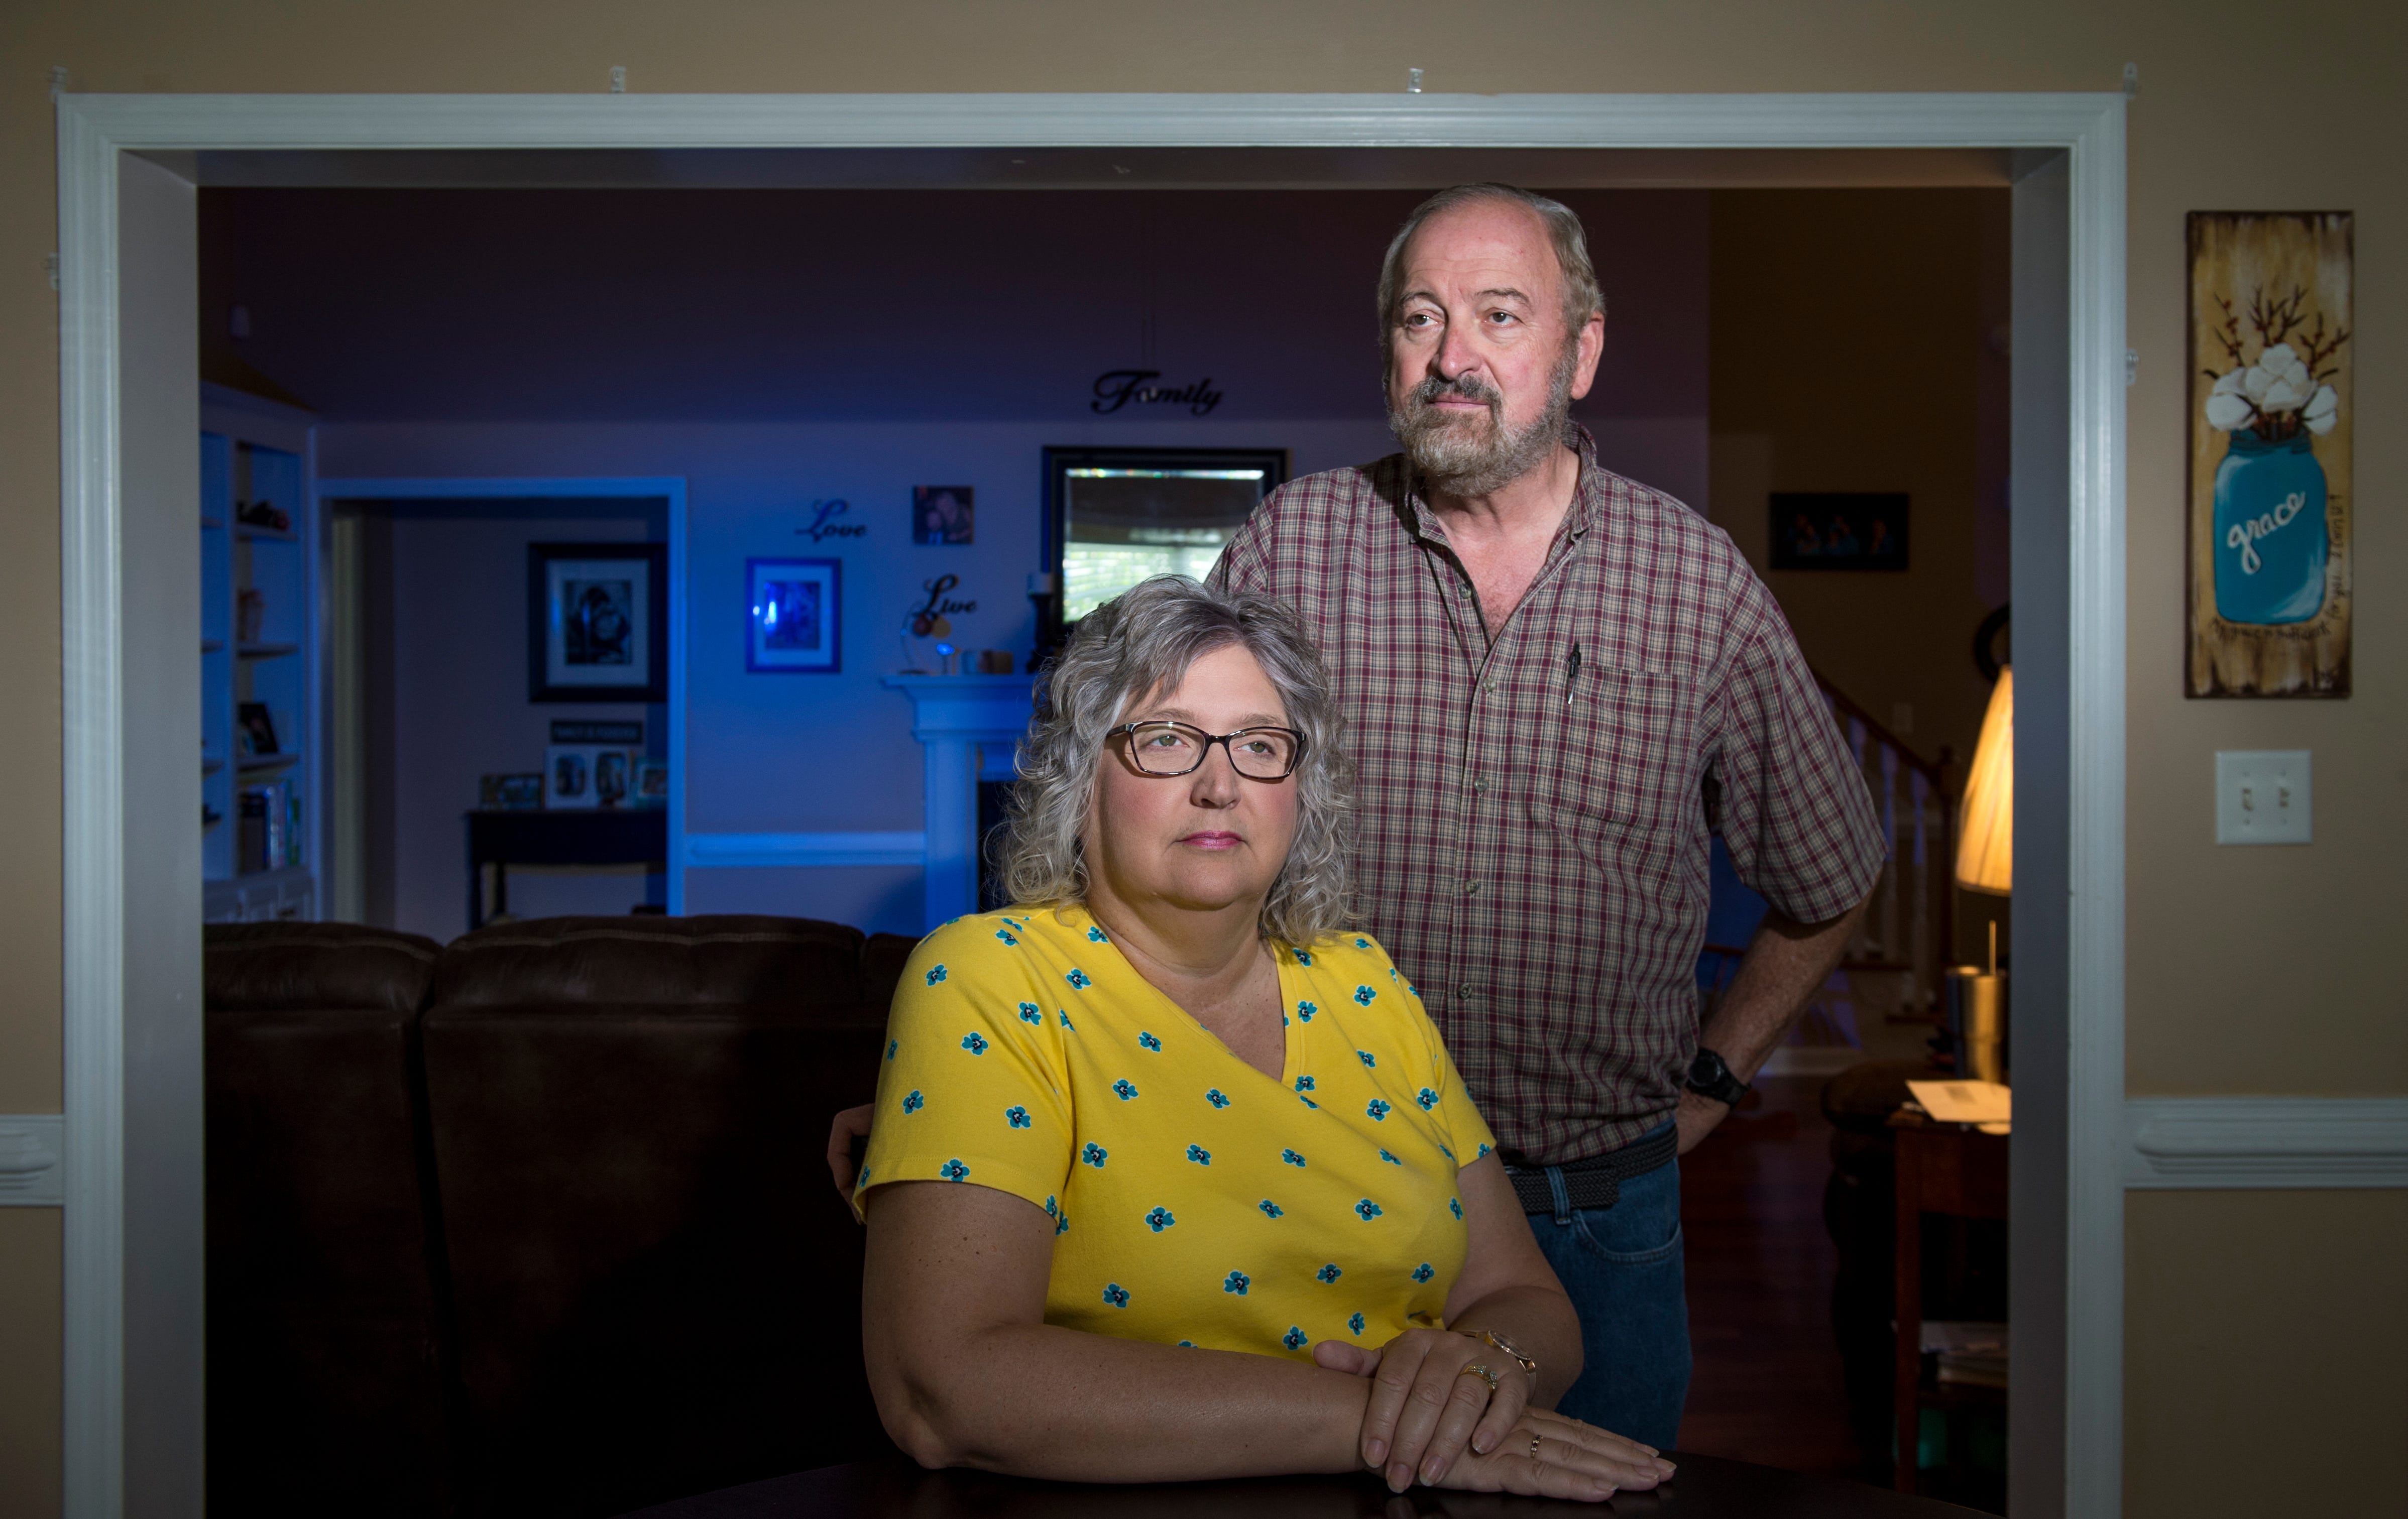 Georgia residents Teresa and John Johnson were aboard a cruise ship that experienced one of the first outbreaks. They were quarantined at Dobbins Air Reserve Base and had symptoms, yet they were never tested before being sent home.